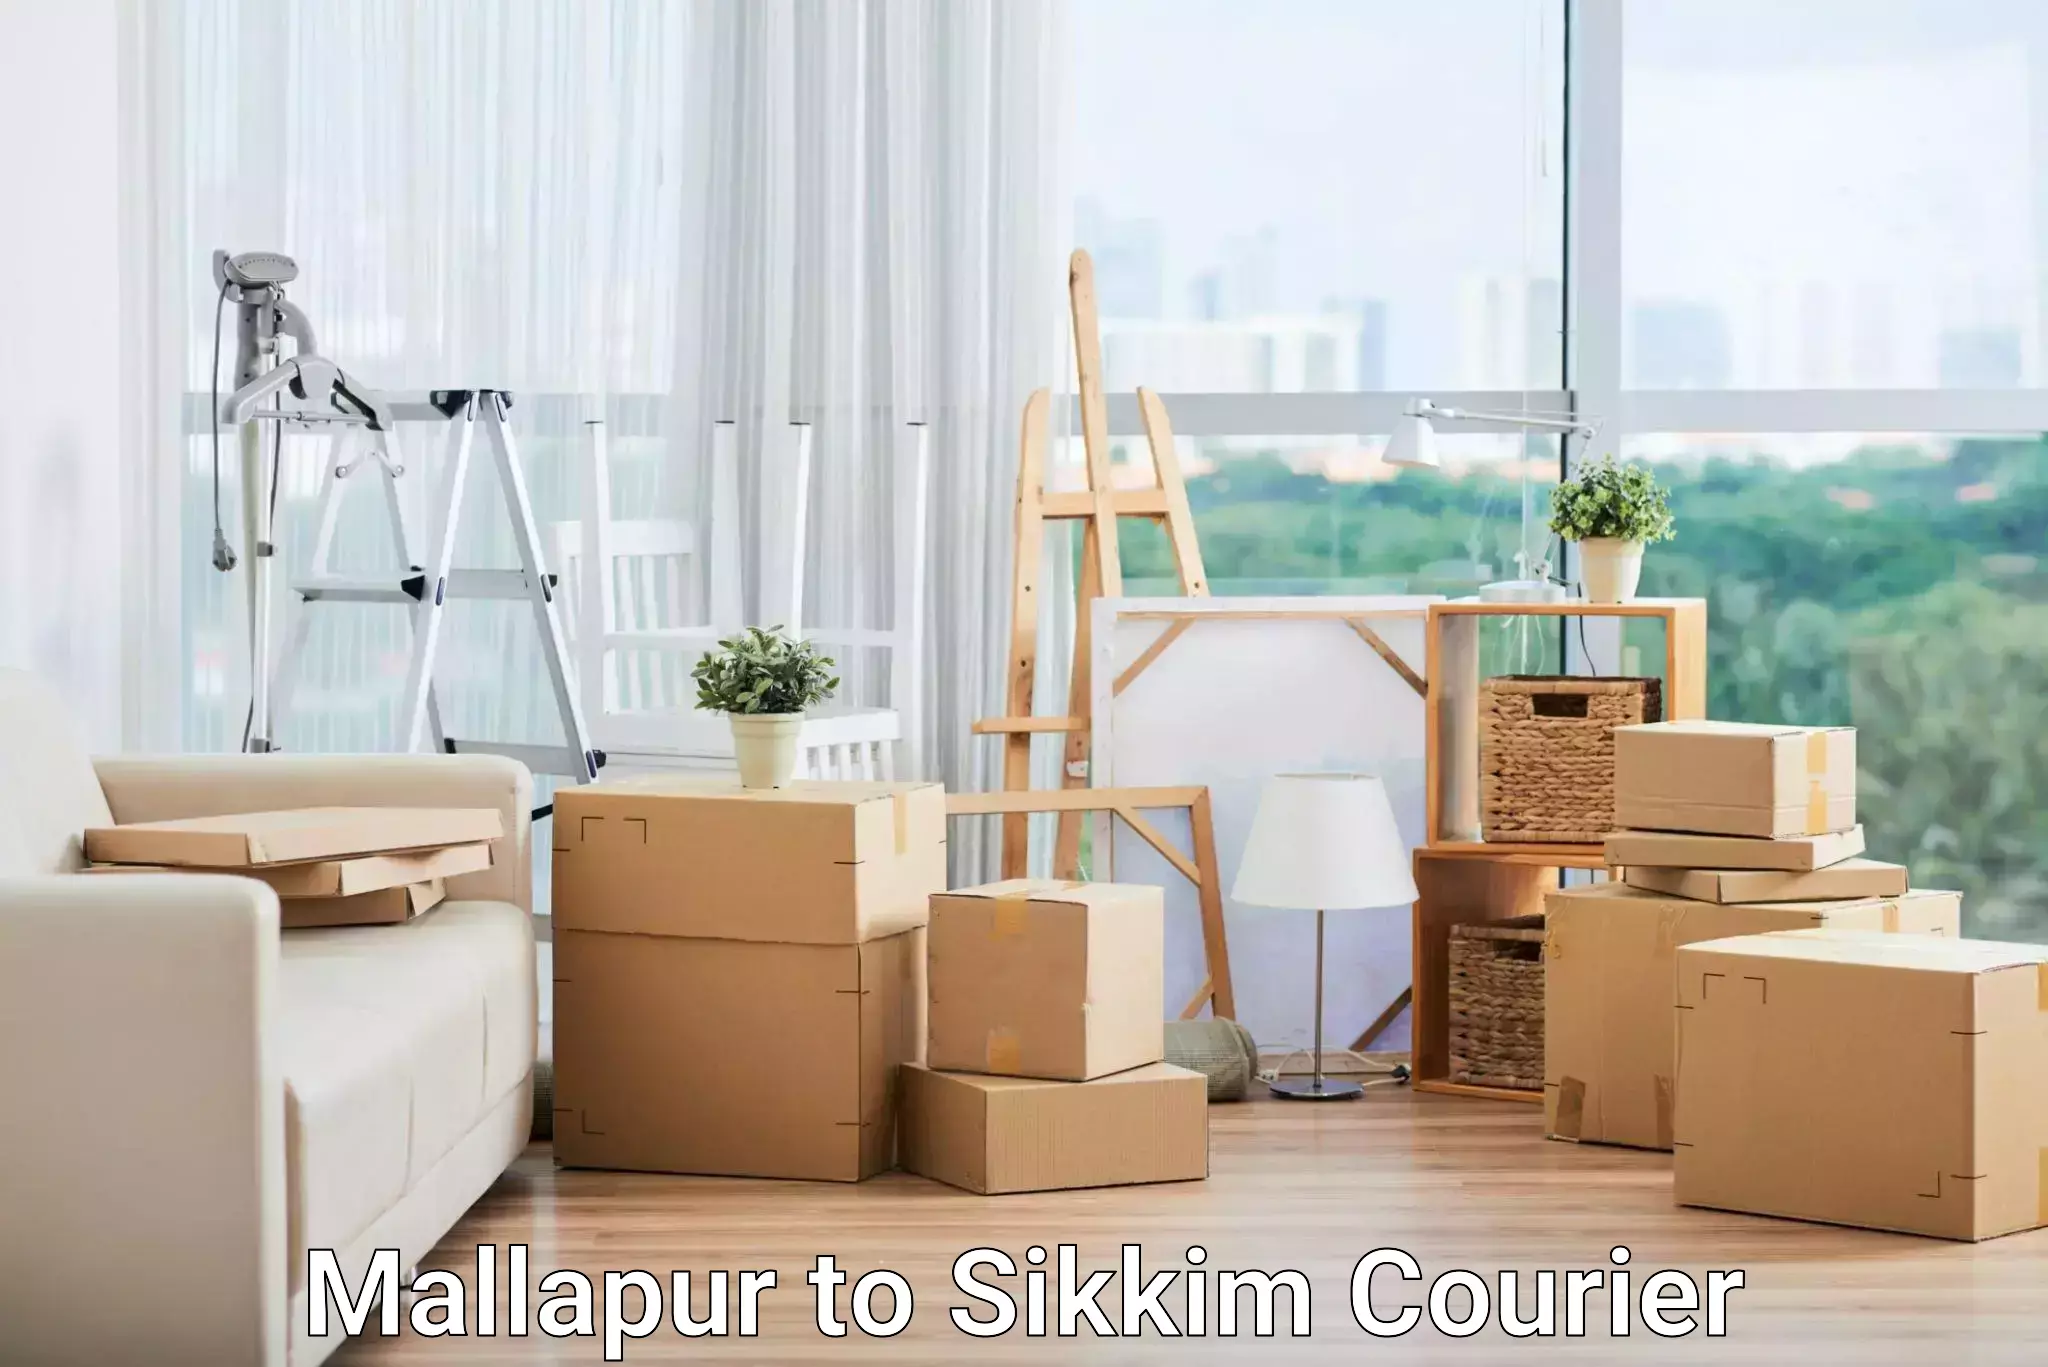 Online package tracking Mallapur to Gangtok